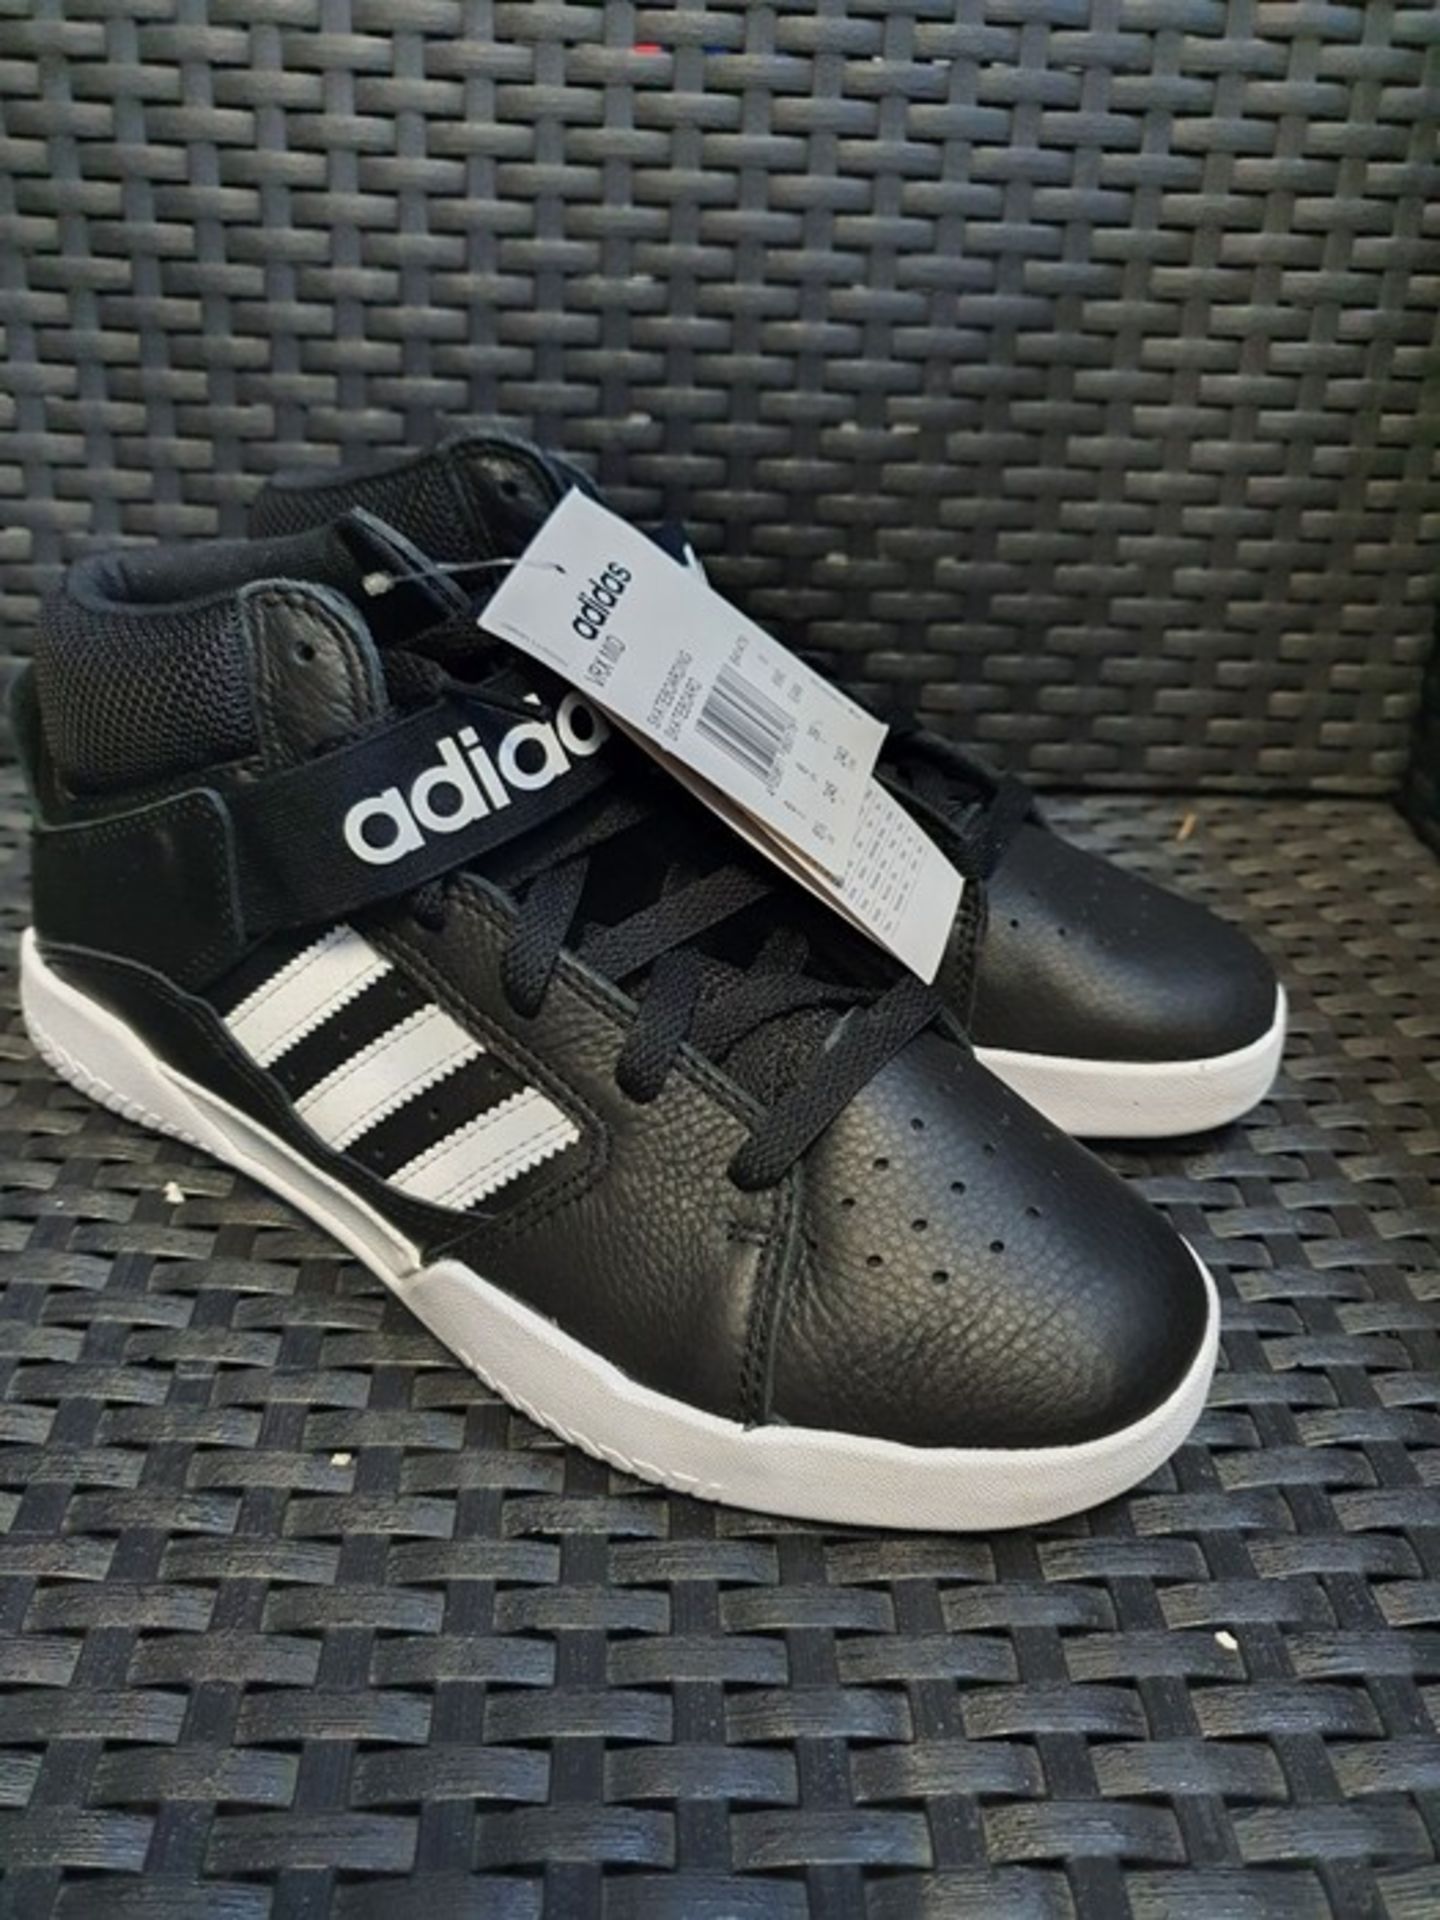 ONE PAIR OF ADIDAS VRX MID 'SKATEBOARDING' TRAINER IN BLACK - SIZE UK 6. RRP £85.00. GRADE A* - AS